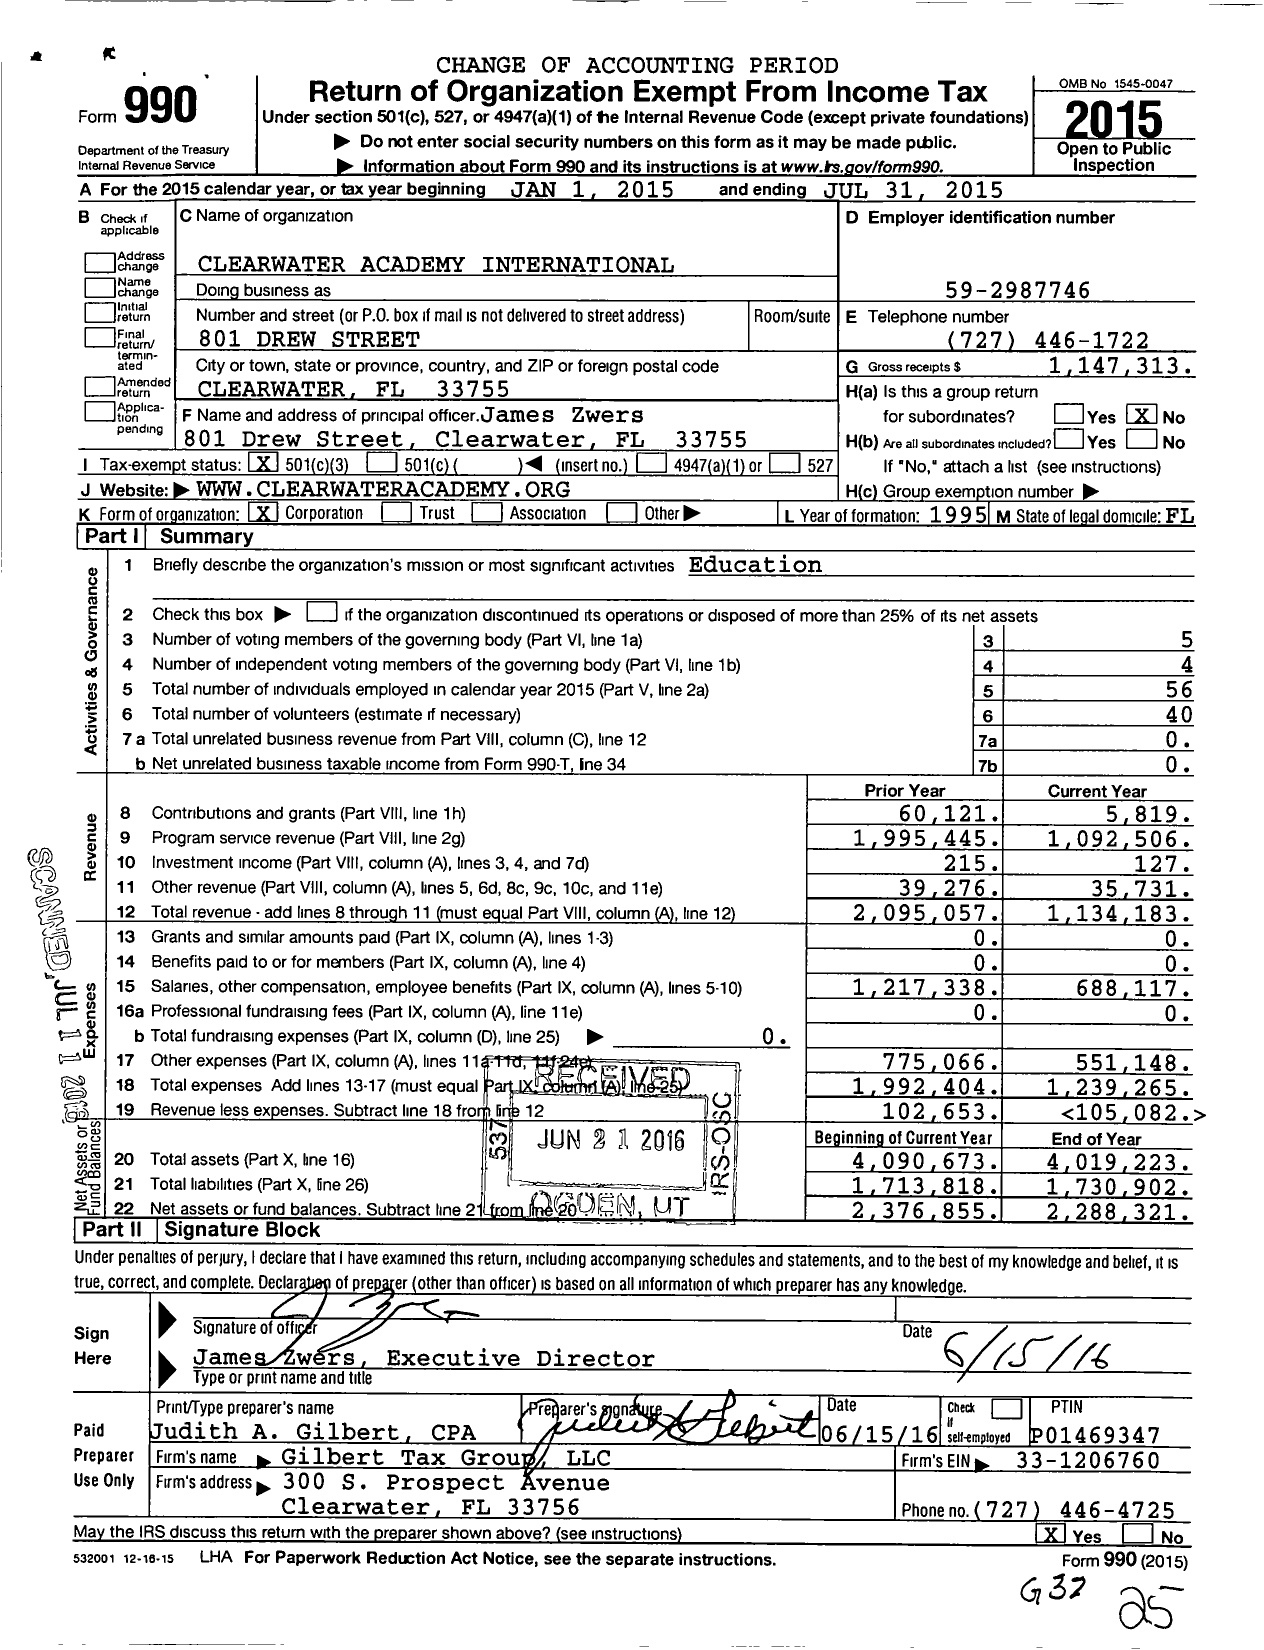 Image of first page of 2014 Form 990 for Clearwater Academy International (CAI)